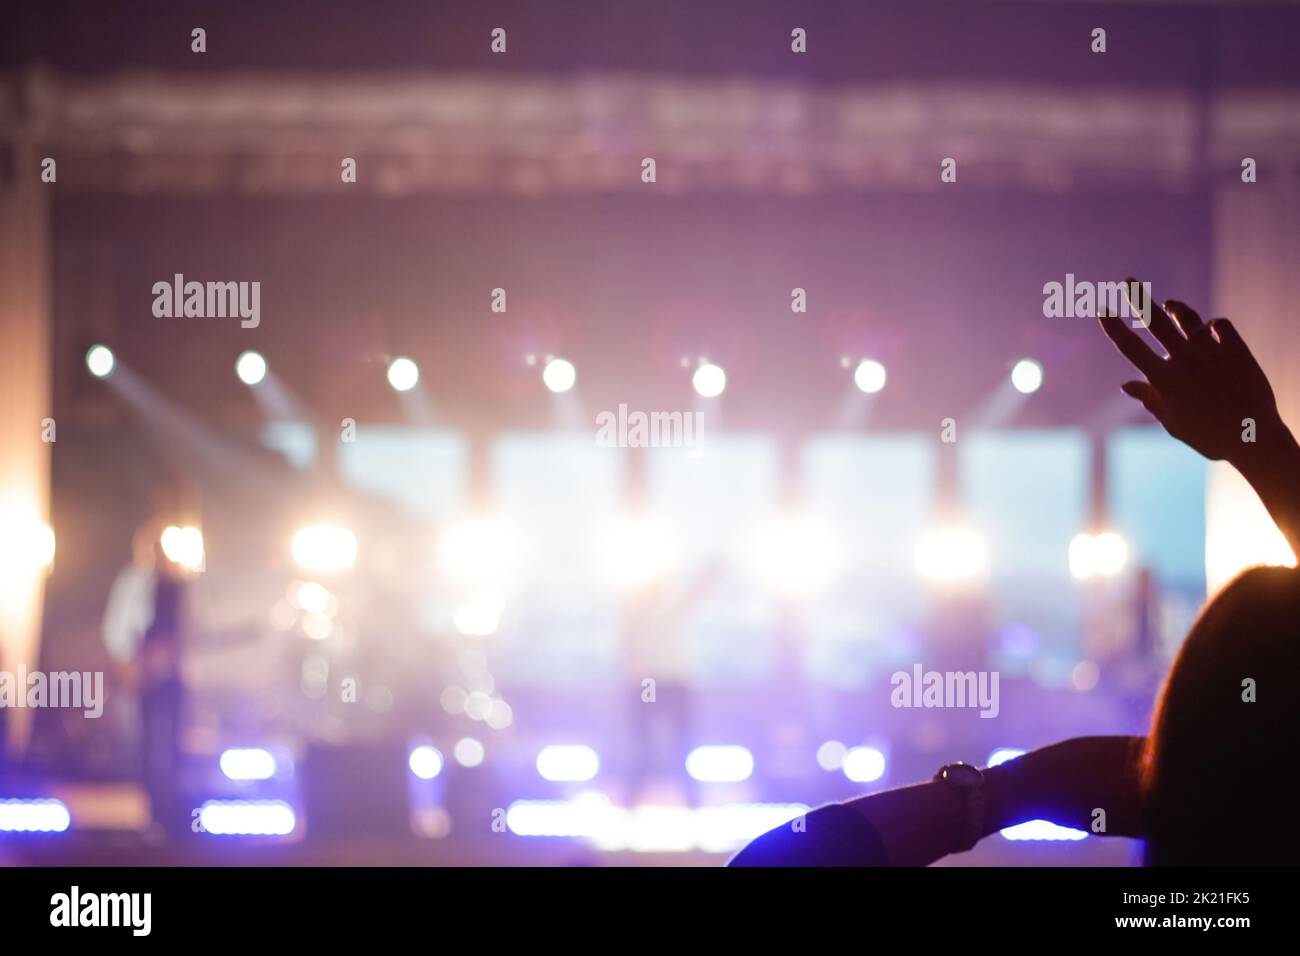 Defocus silhouette of one woman raise hand up in music concert with purple and white color spotlight on stage background. Out of focus. Stock Photo